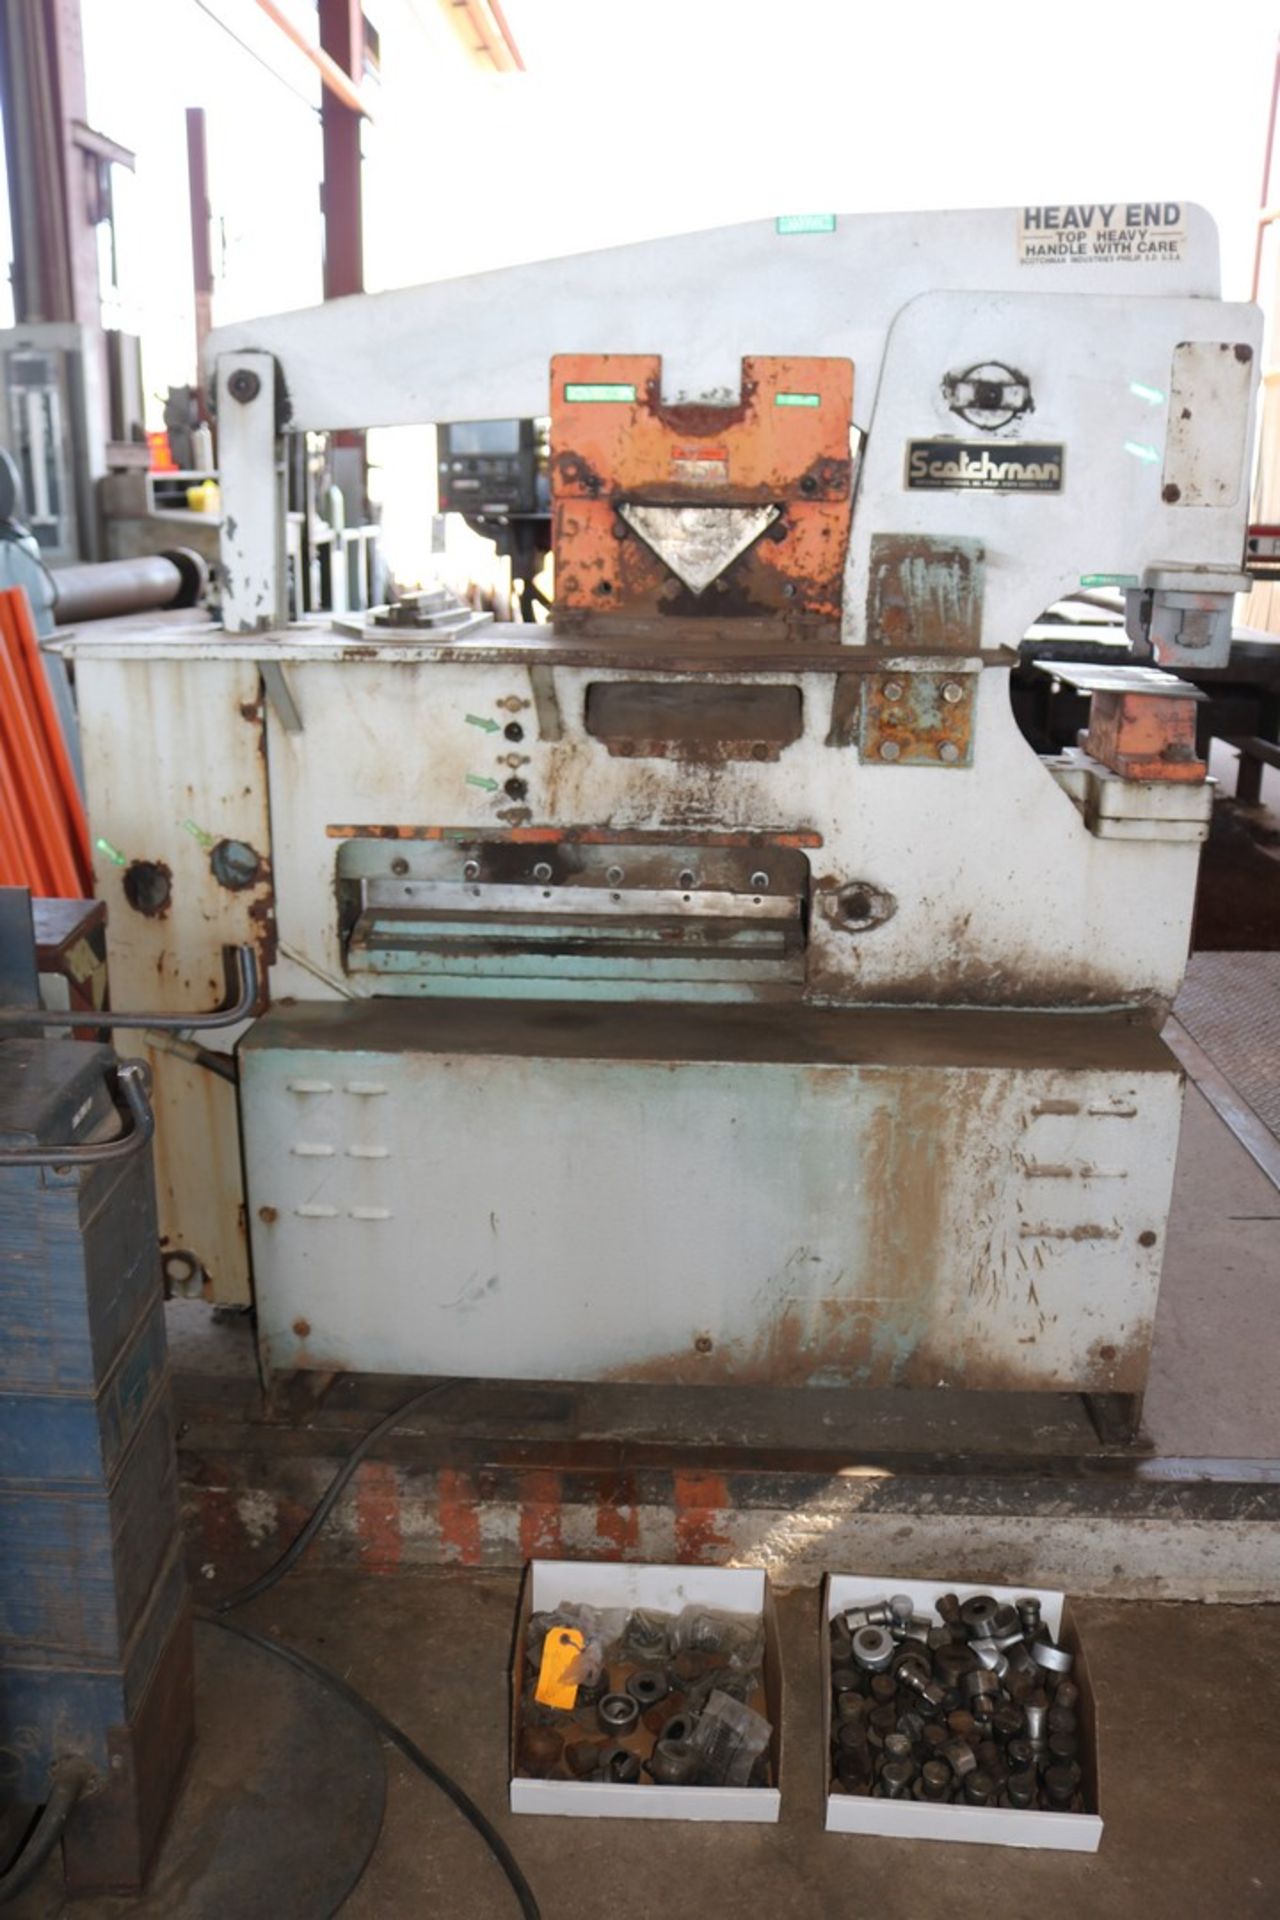 Scotchman Ironworker 65 ton, tooling included, model 6509-24m - Image 2 of 8